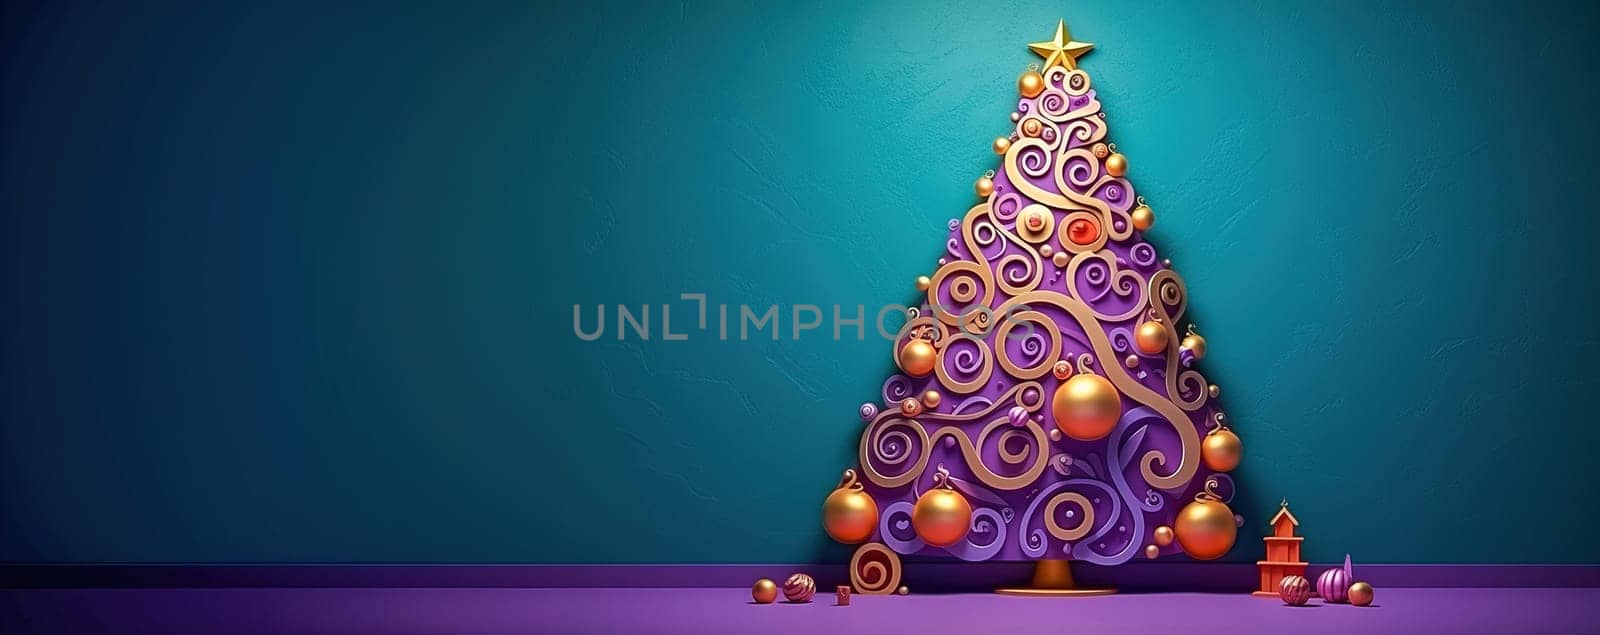 Illustration of 3d Christmas tree on green background. High quality illustration